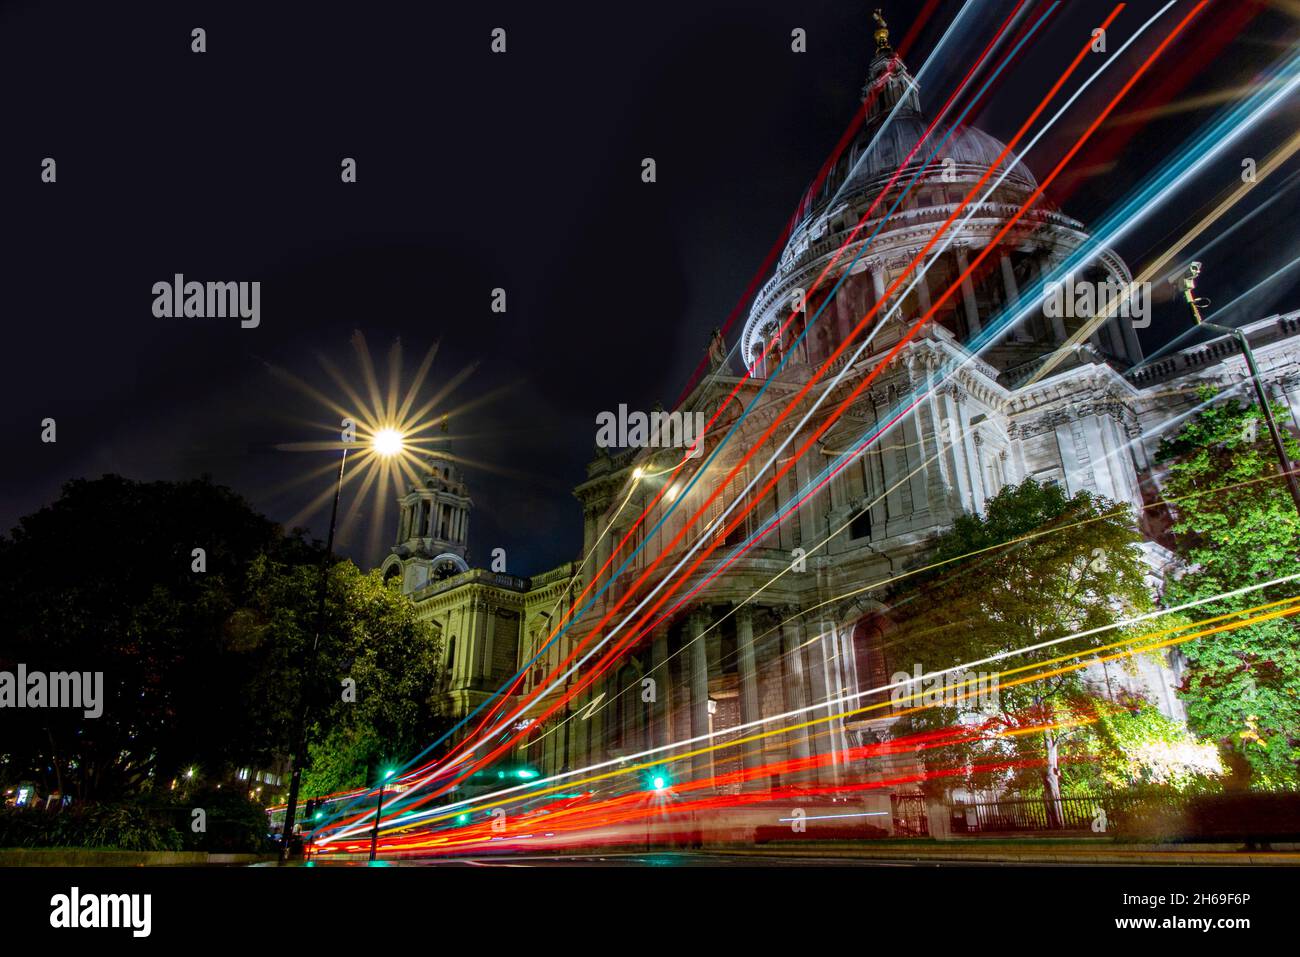 ST PAUL'S CATHEDRAL AT NIGHT WITH BUS LIGHT TRAILS Stock Photo